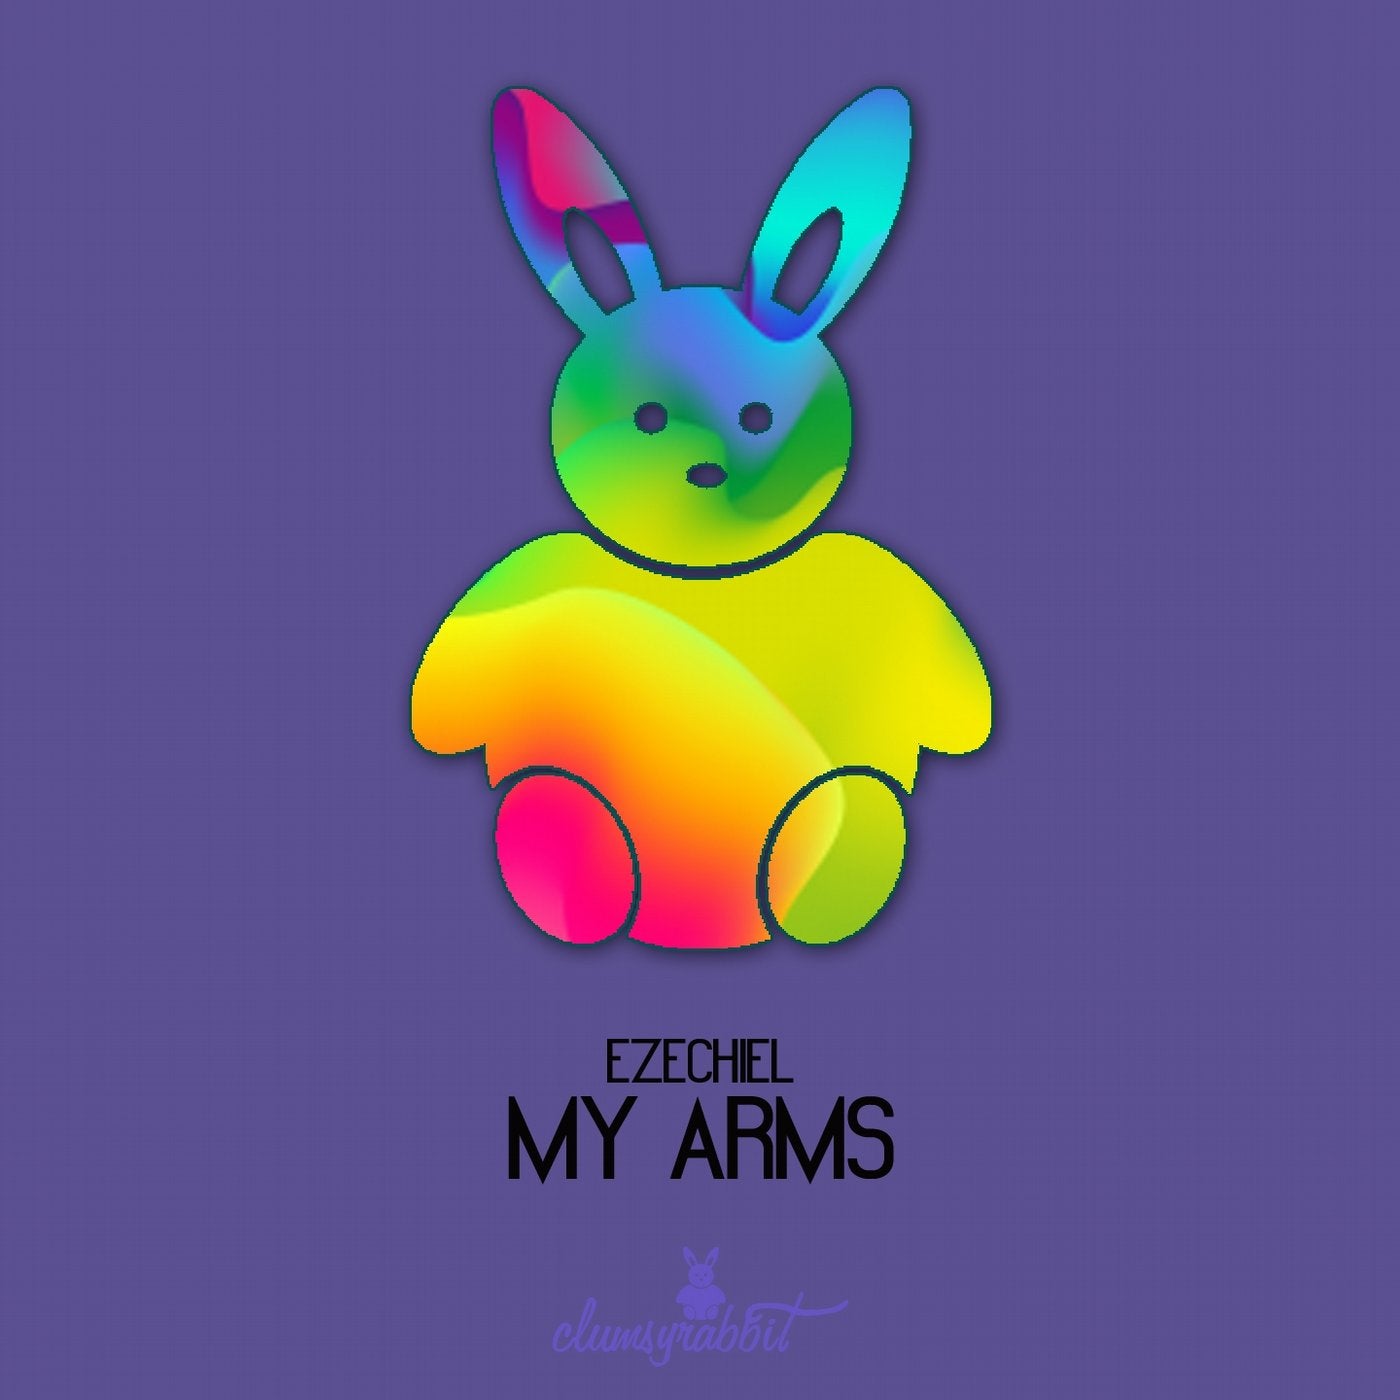 My Arms